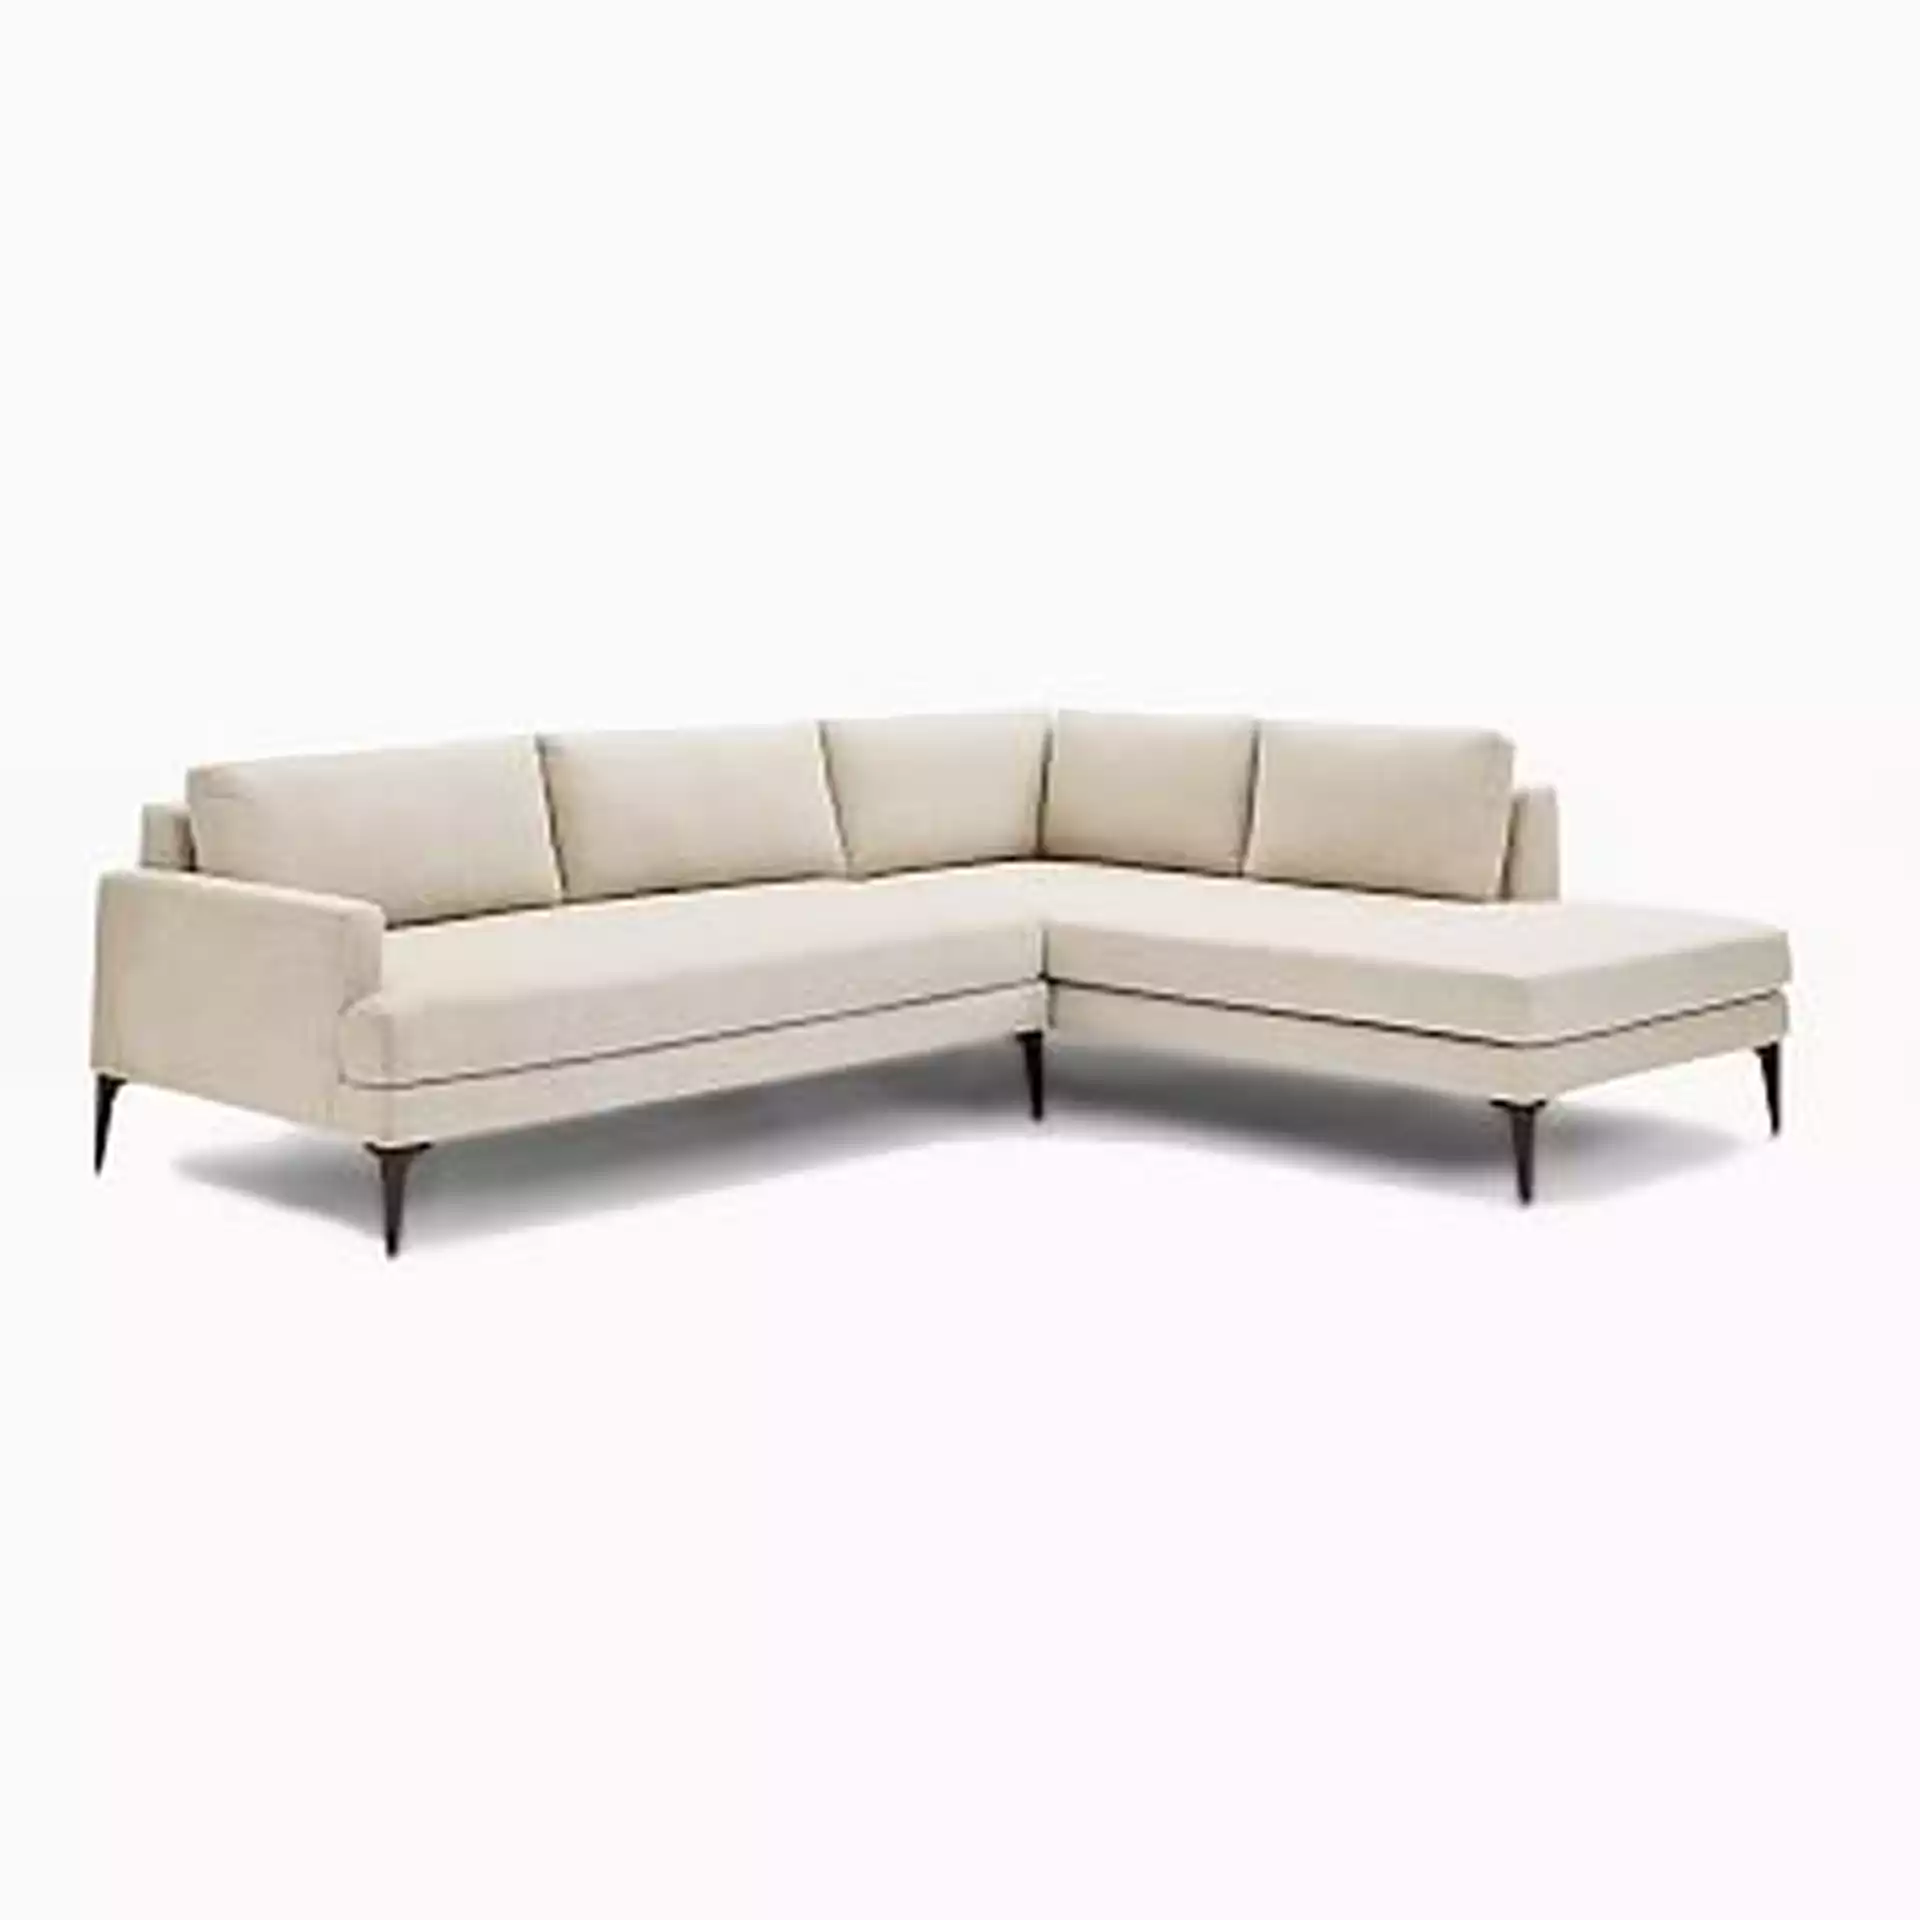 Andes Sectional Set 14: Right Arm 2.5 Seater Sofa, Left Arm Terminal Chaise, Poly , Distressed Velvet, Dune, Blackened Brass